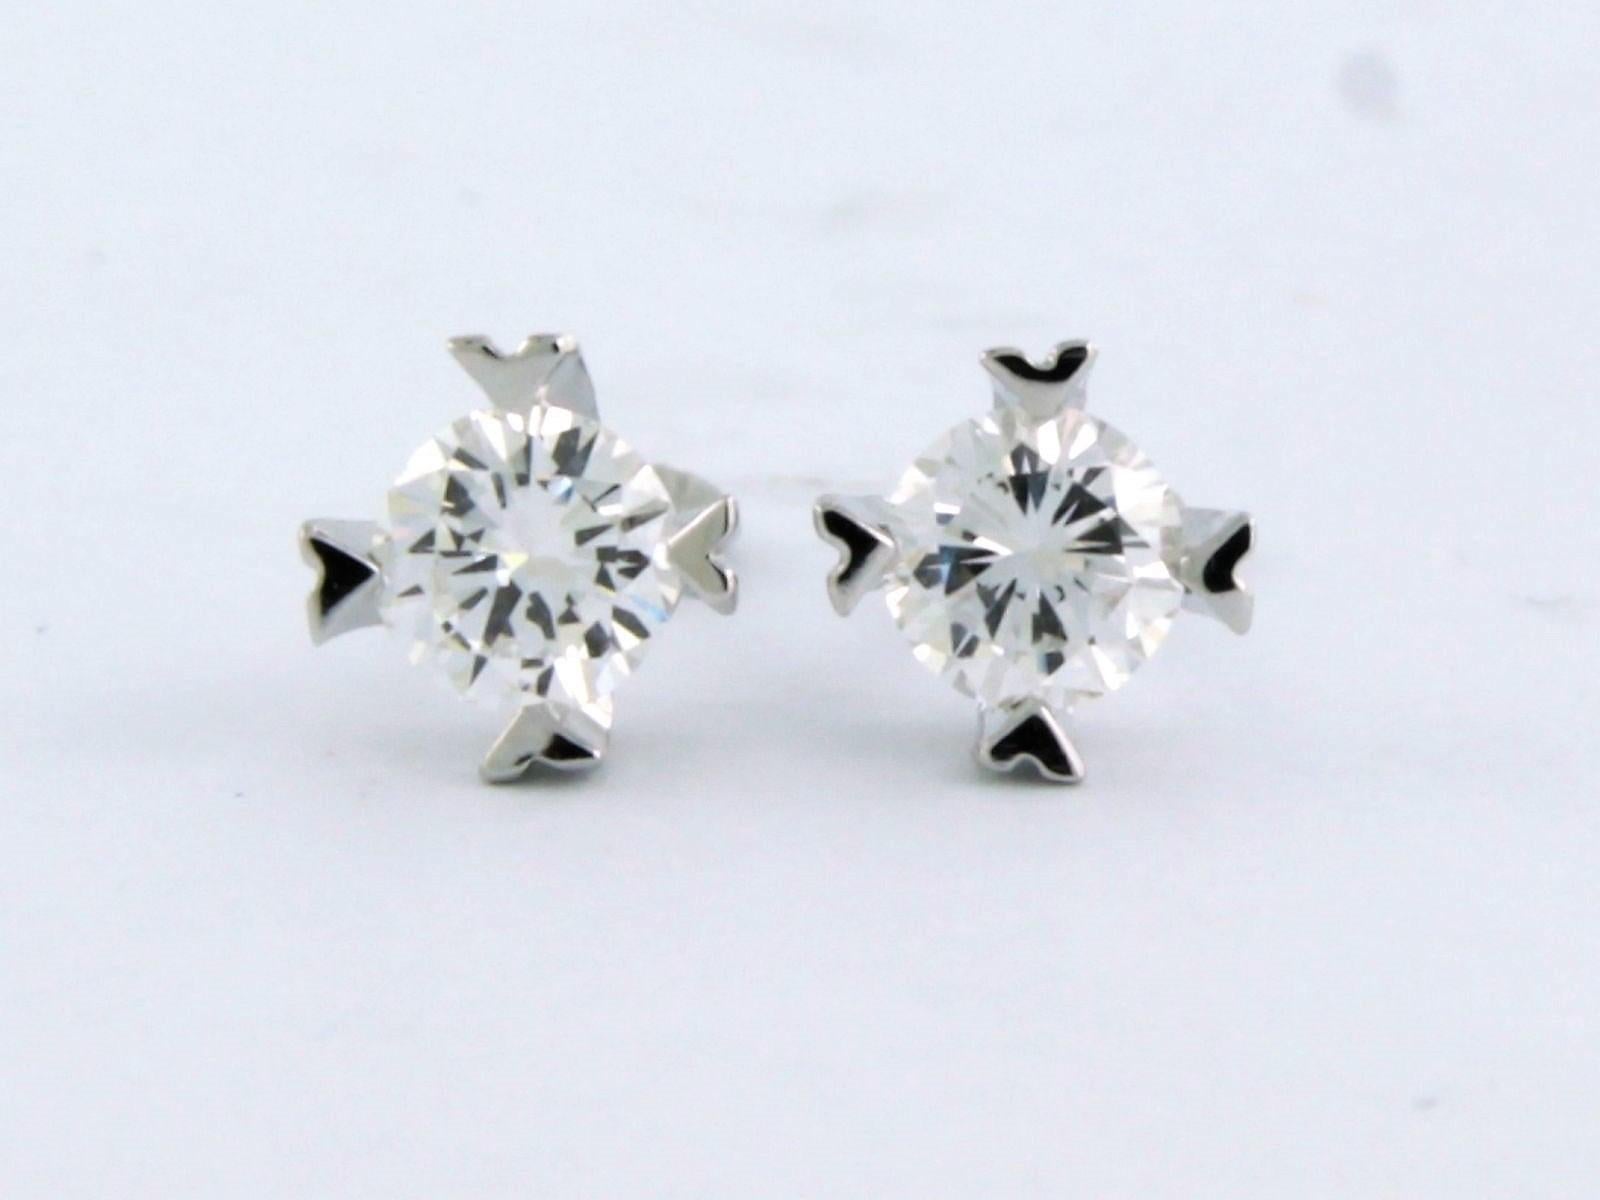 14k white gold solitaire earrings set with brilliant cut diamonds. 0.58ct - G/H - VS/SI

detailed description:

The size of the ear stud is 6.1 mm wide

weight: 1.4 grams

occupied with :

- 2 x 4.2 mm brilliant cut diamond, total approximately 0.58